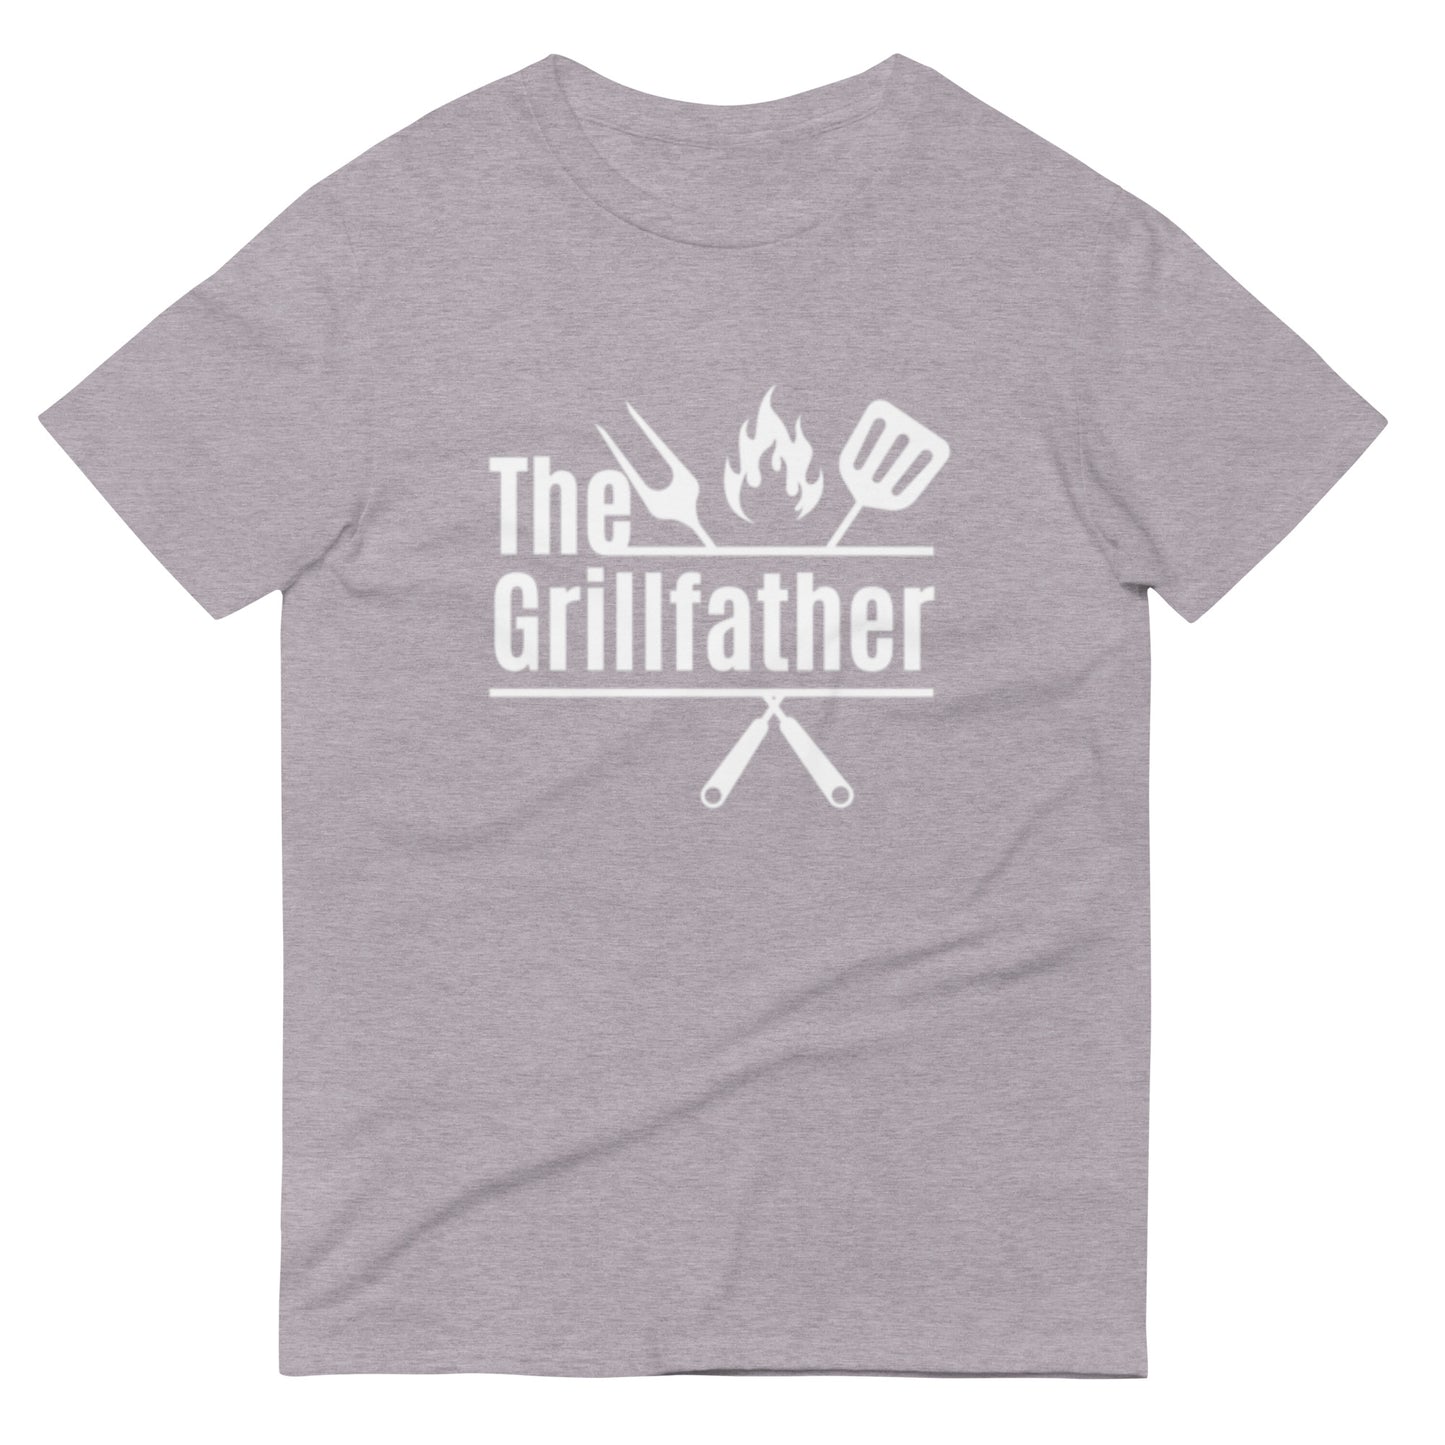 The Grill Father Short-Sleeve T-Shirt